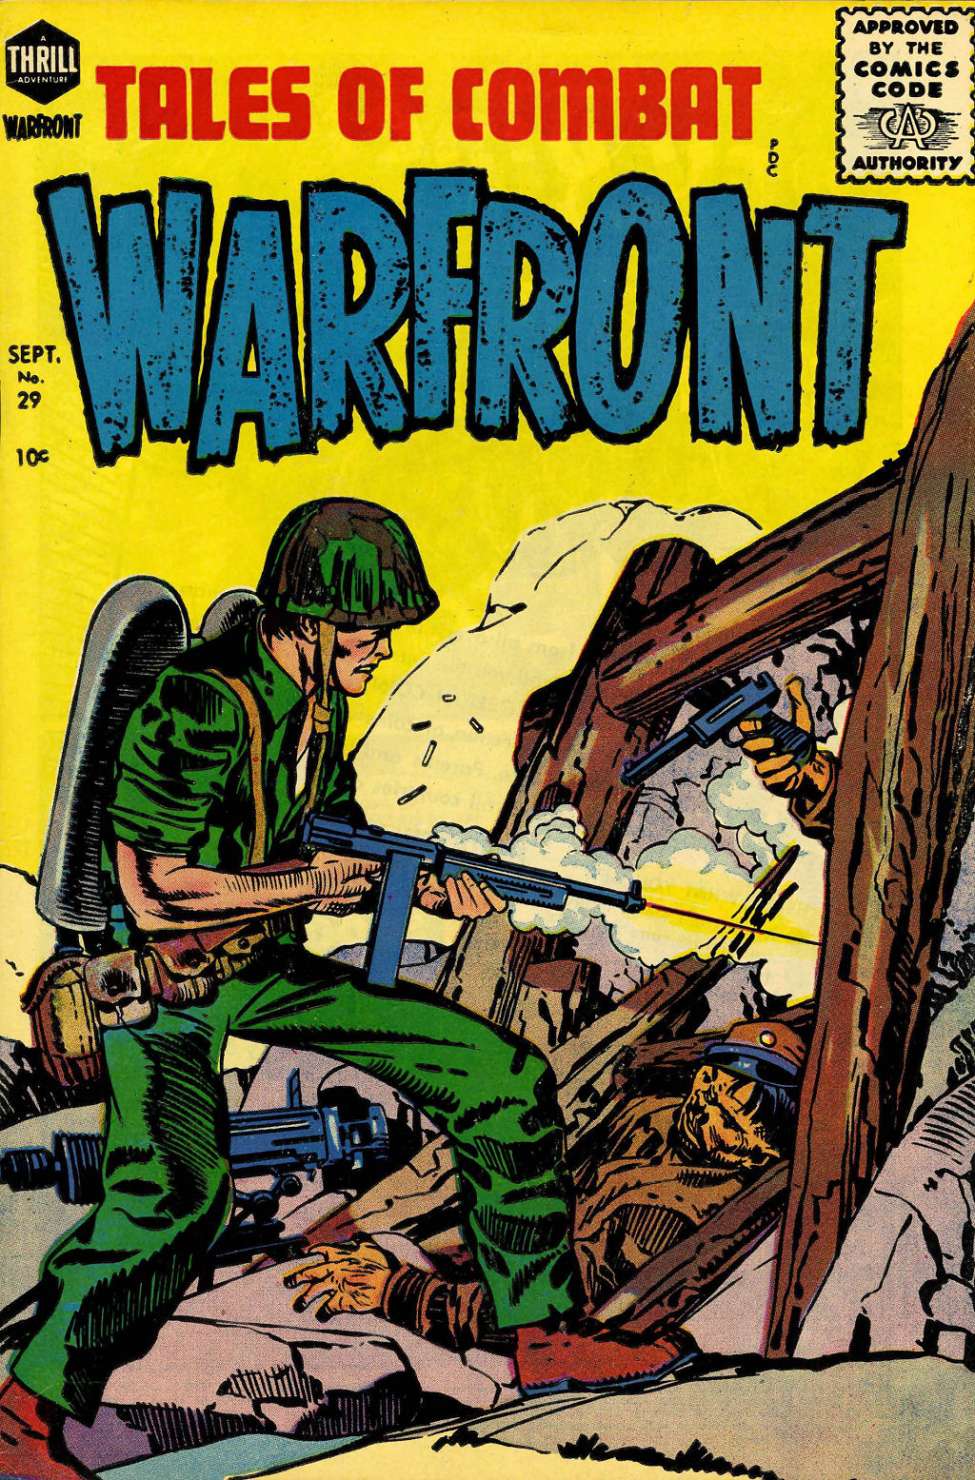 Comic Book Cover For Warfront 29